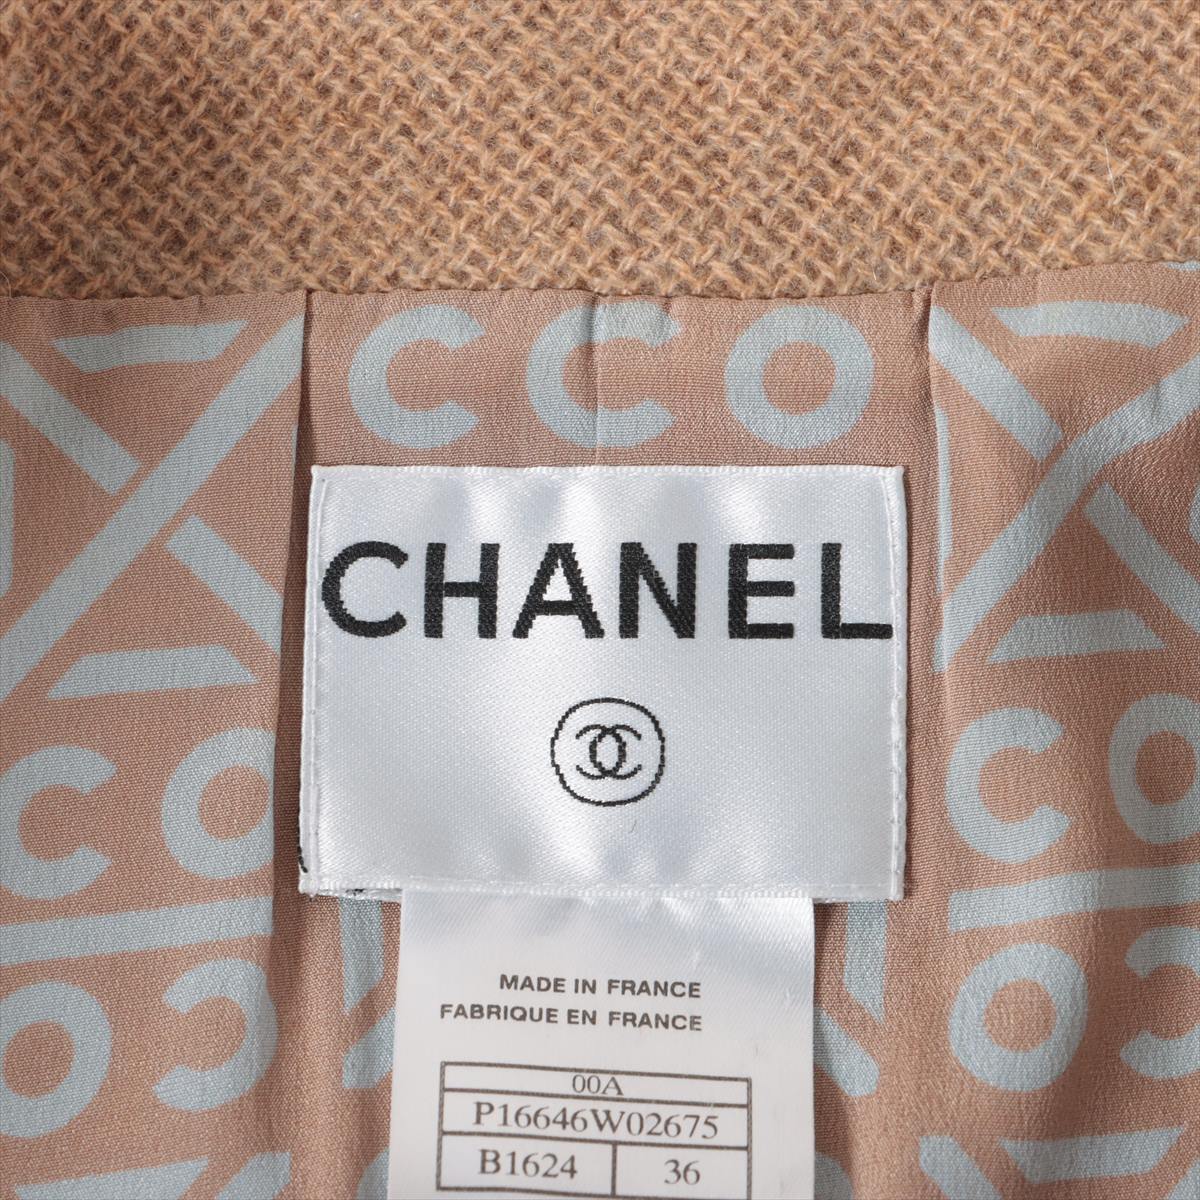 Chanel Coco Mark 00A Cashmere & silk Setup 36 Ladies' Beige x blue  P16646 Skirt button missing on one side